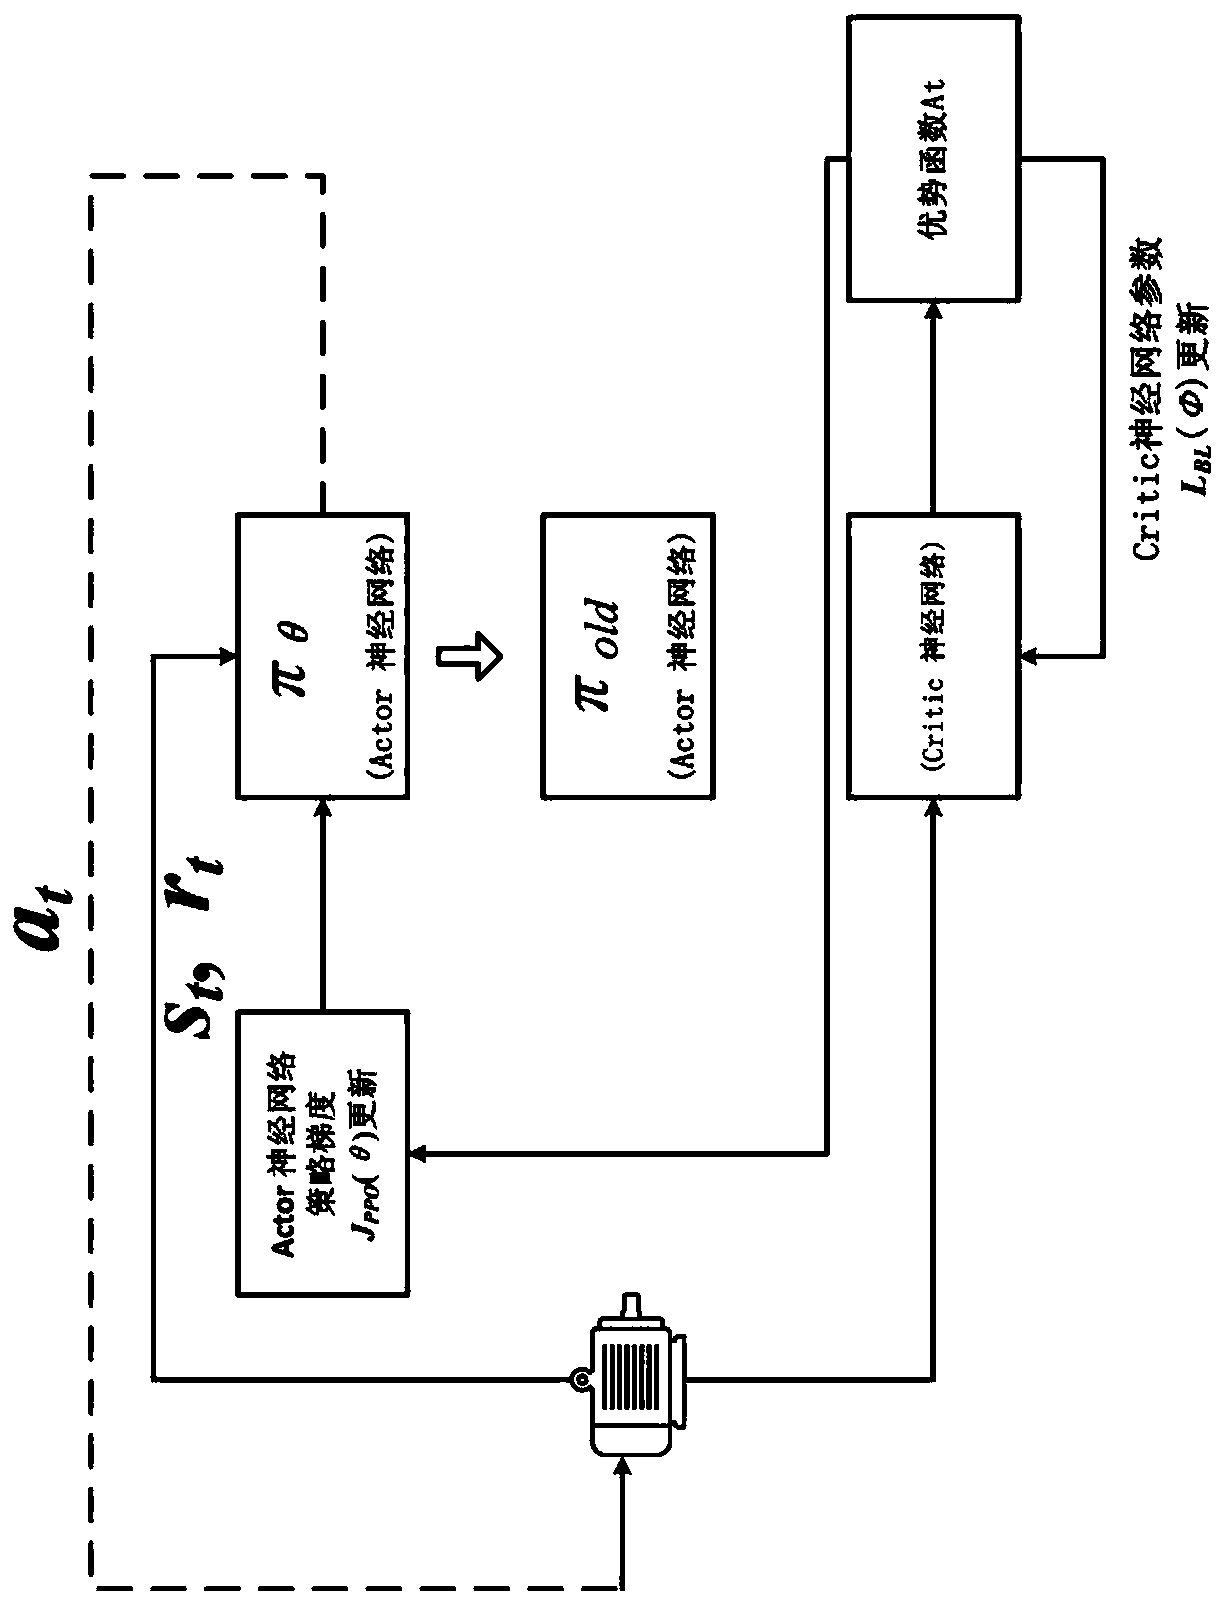 Method for calibrating key parameters of asynchronous motor of electric vehicle